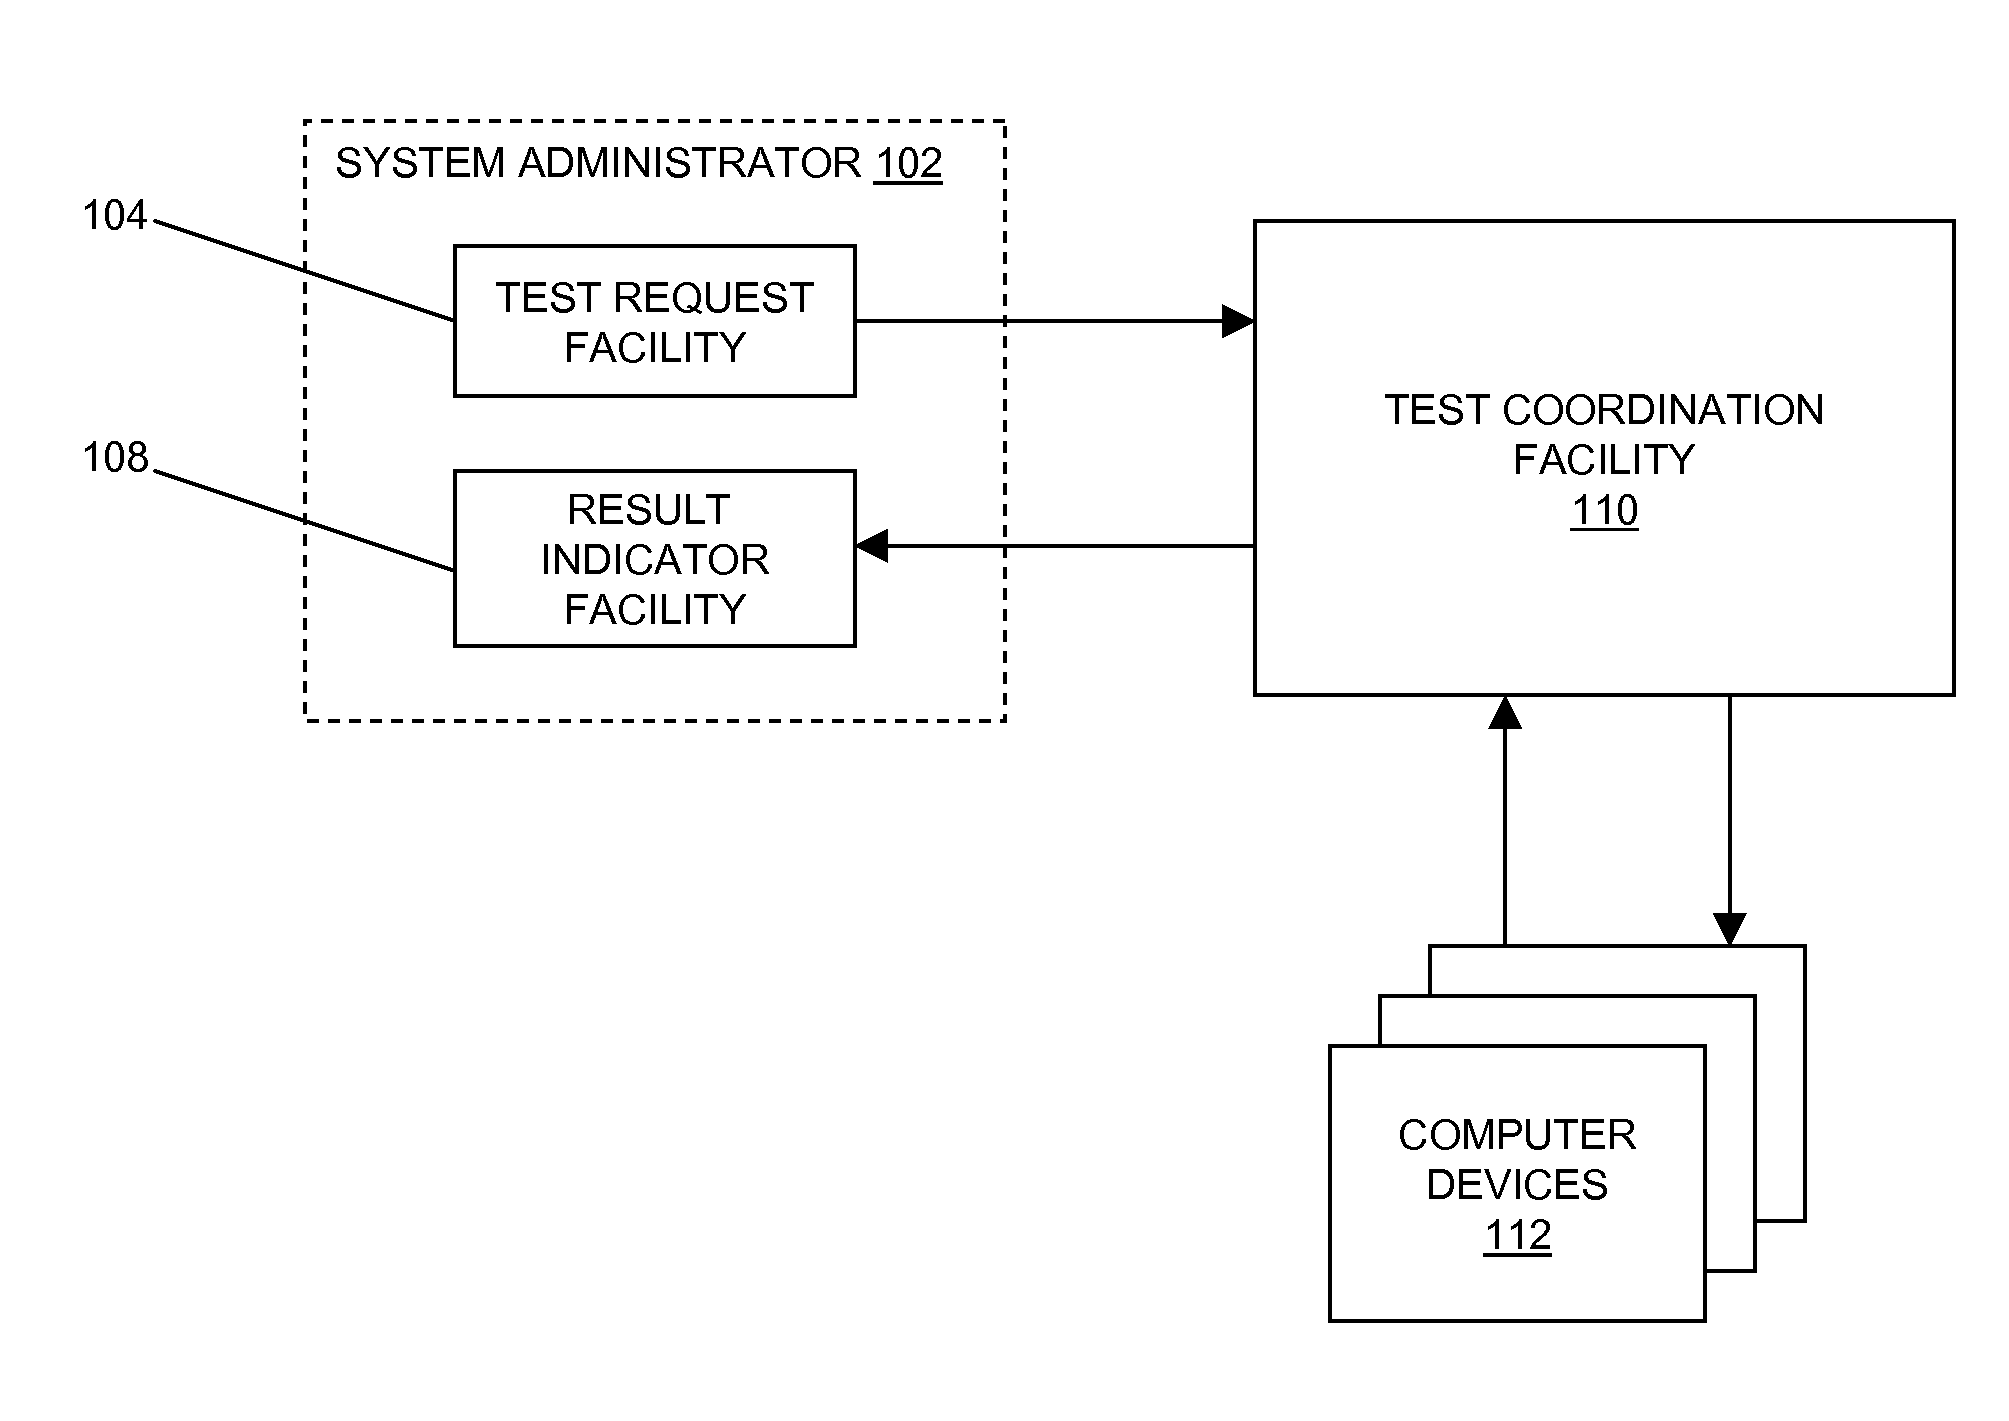 Remote testing of computer devices